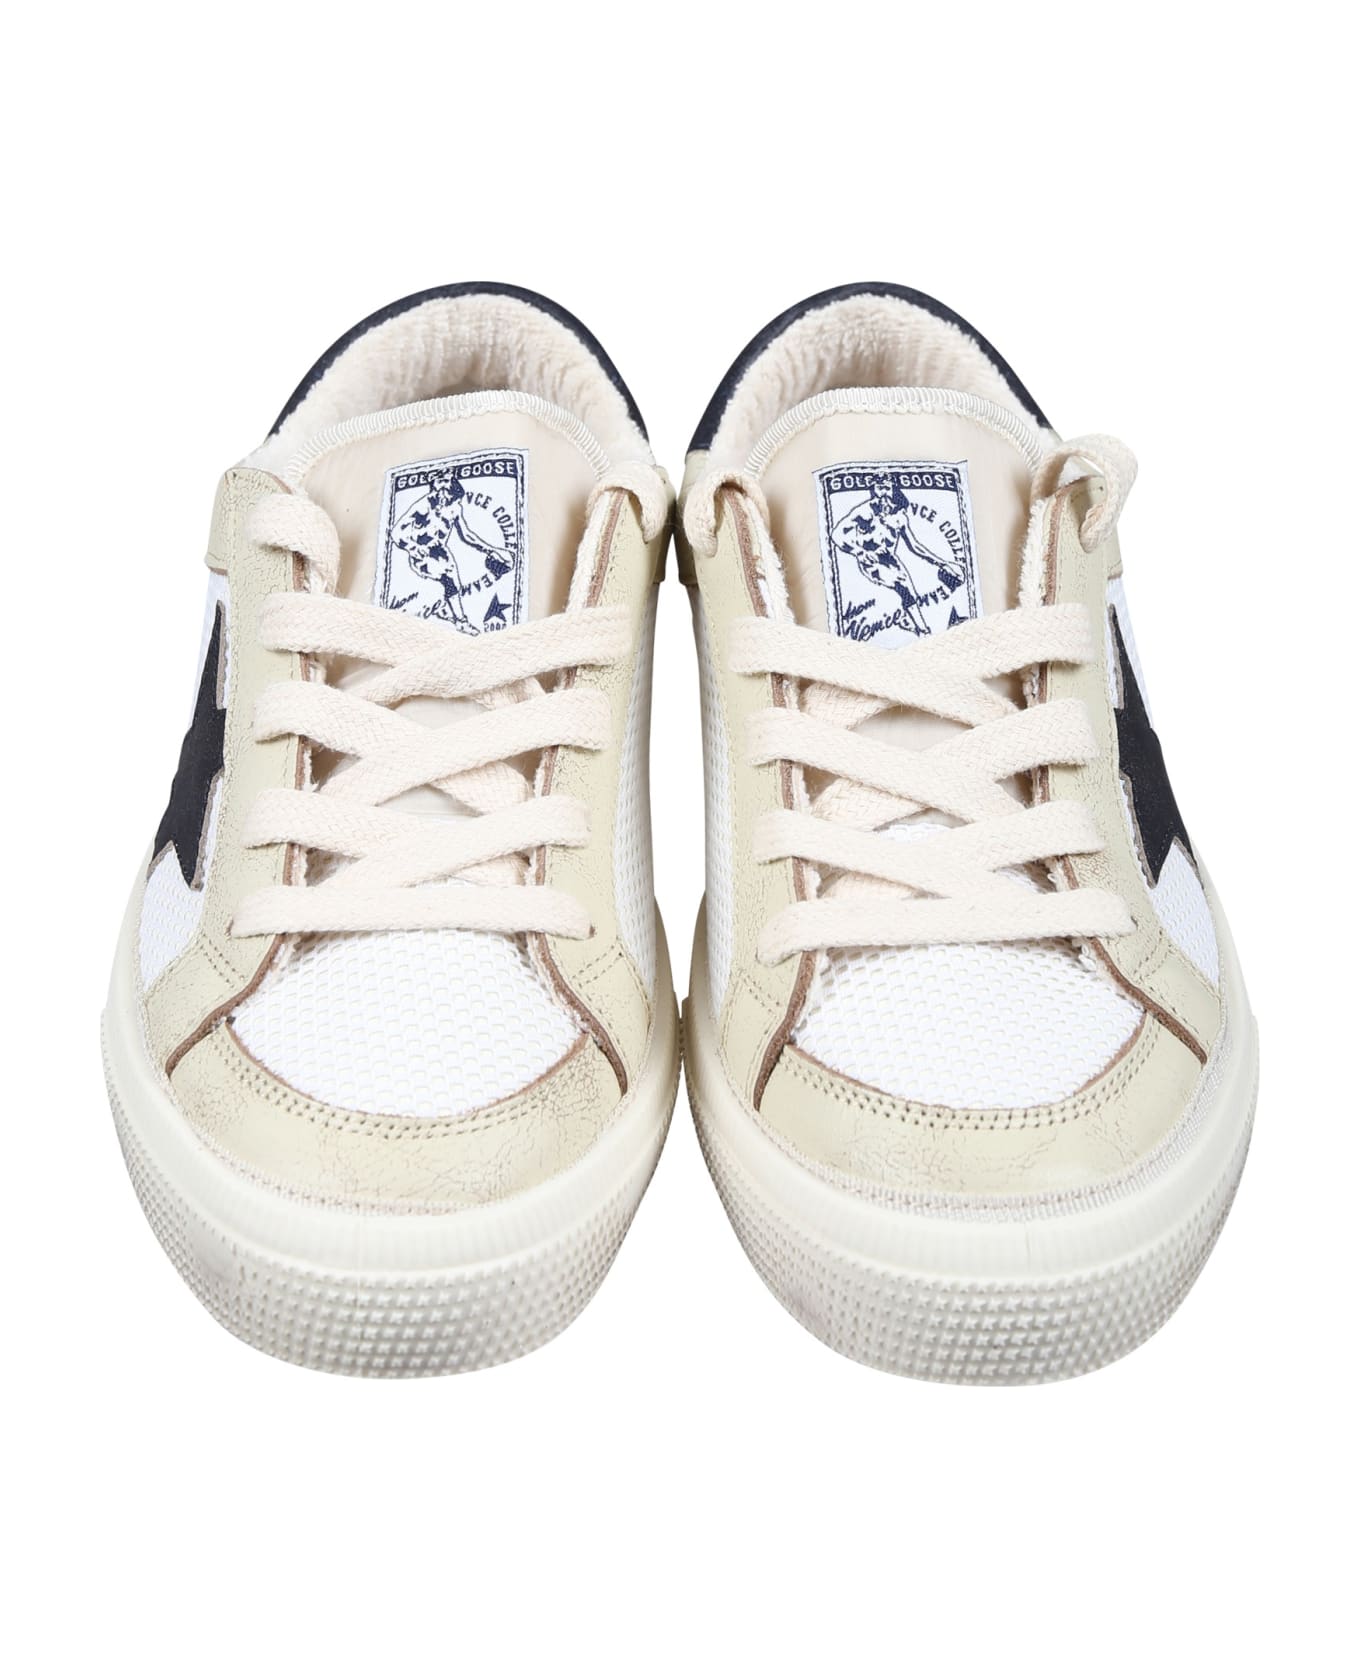 Golden Goose Ivory Sneakers For Kids With Logo - Ivory シューズ